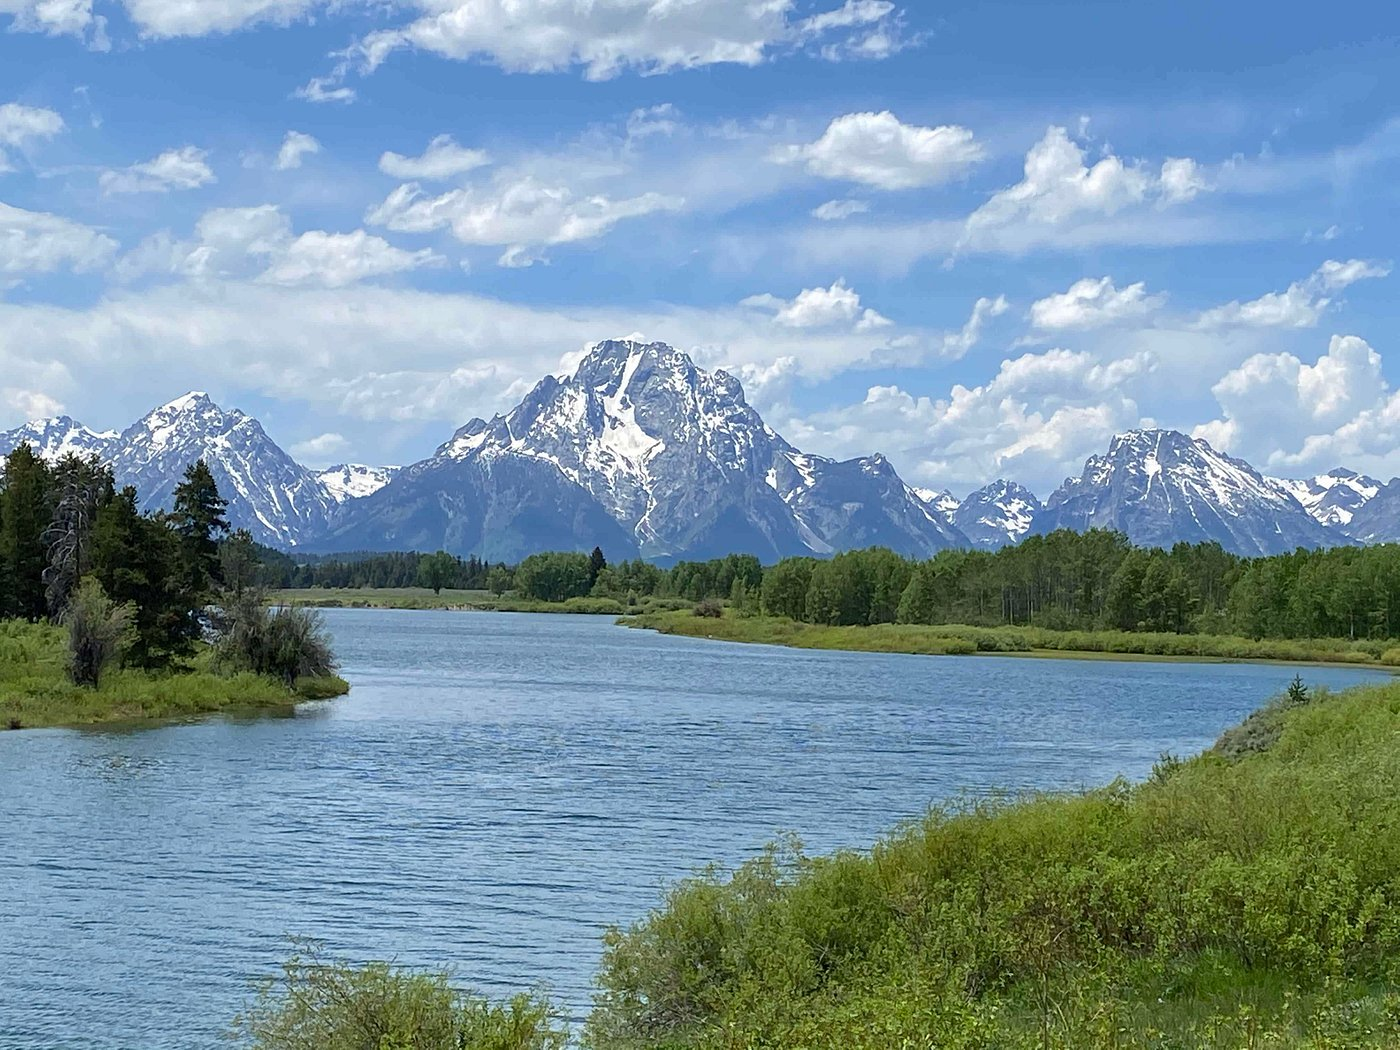 The best paddle boards can make all the difference. Oxbow bend in wyoming, perfect for river paddling or fishing from a stable board.